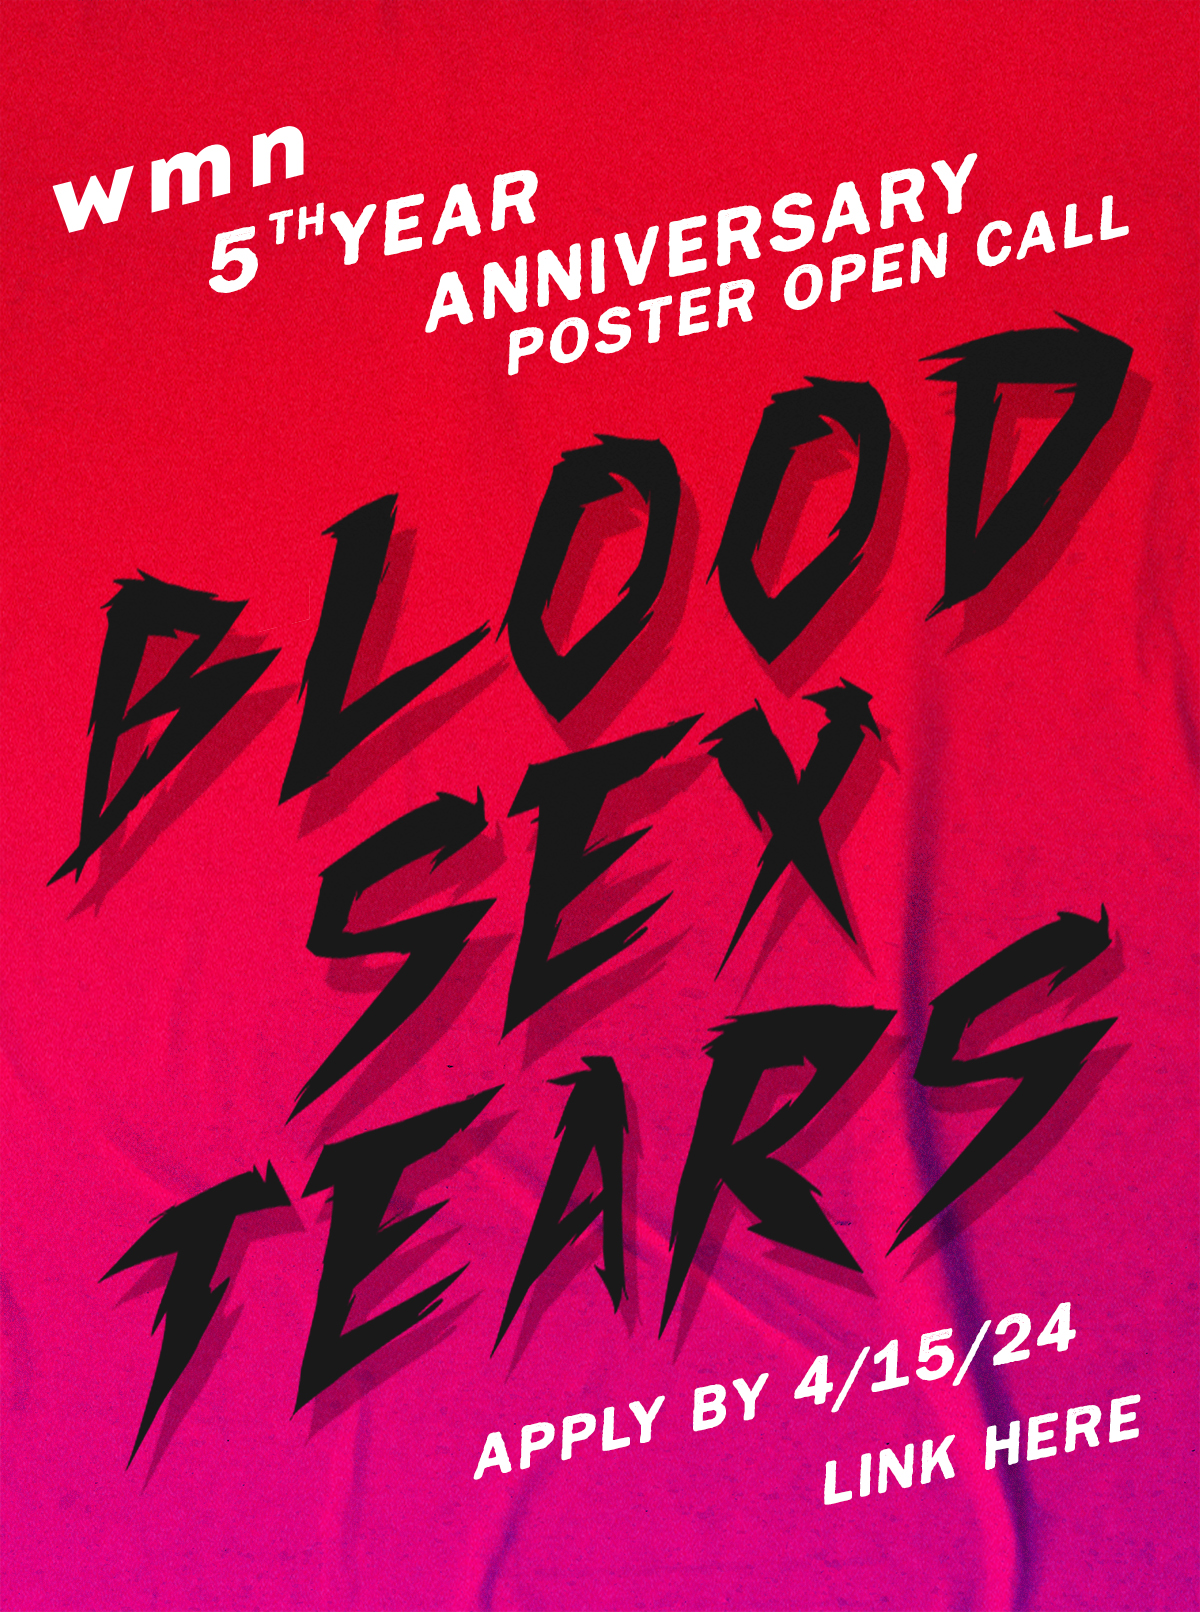 WMN 5th year Anniversary Poster OPEN CALL